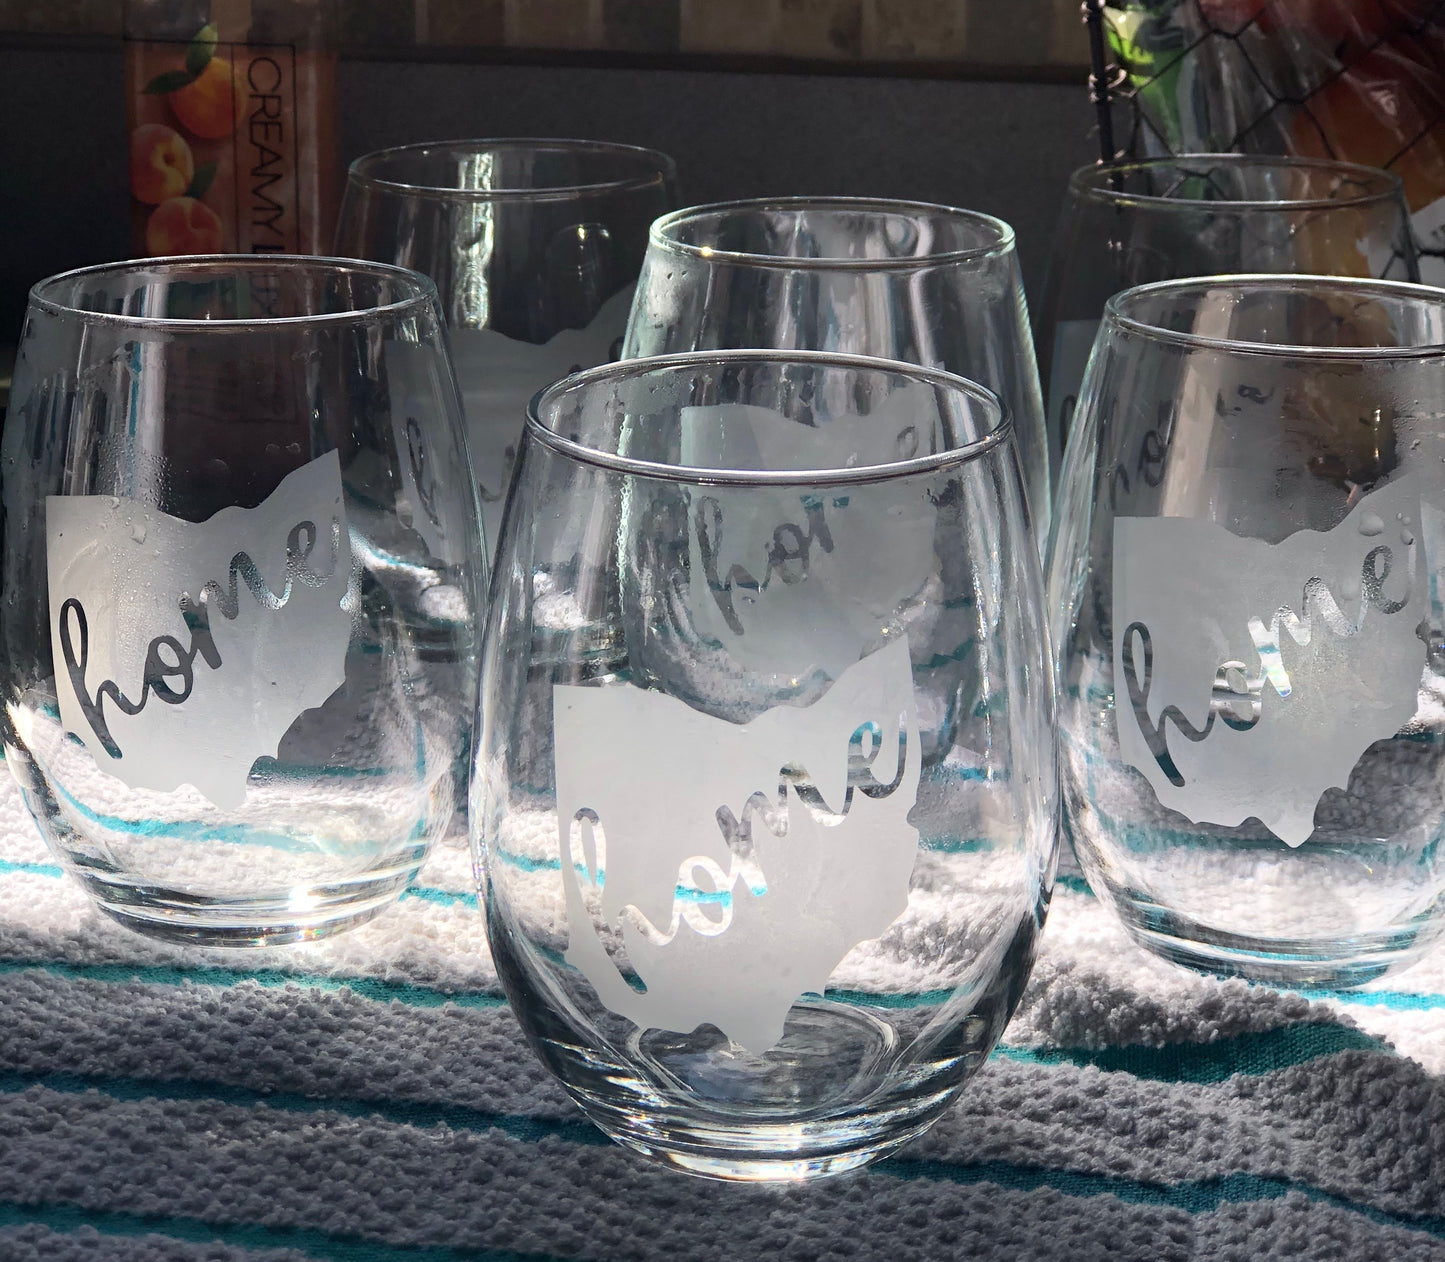 Ohio "Home" Etched Wine Glass